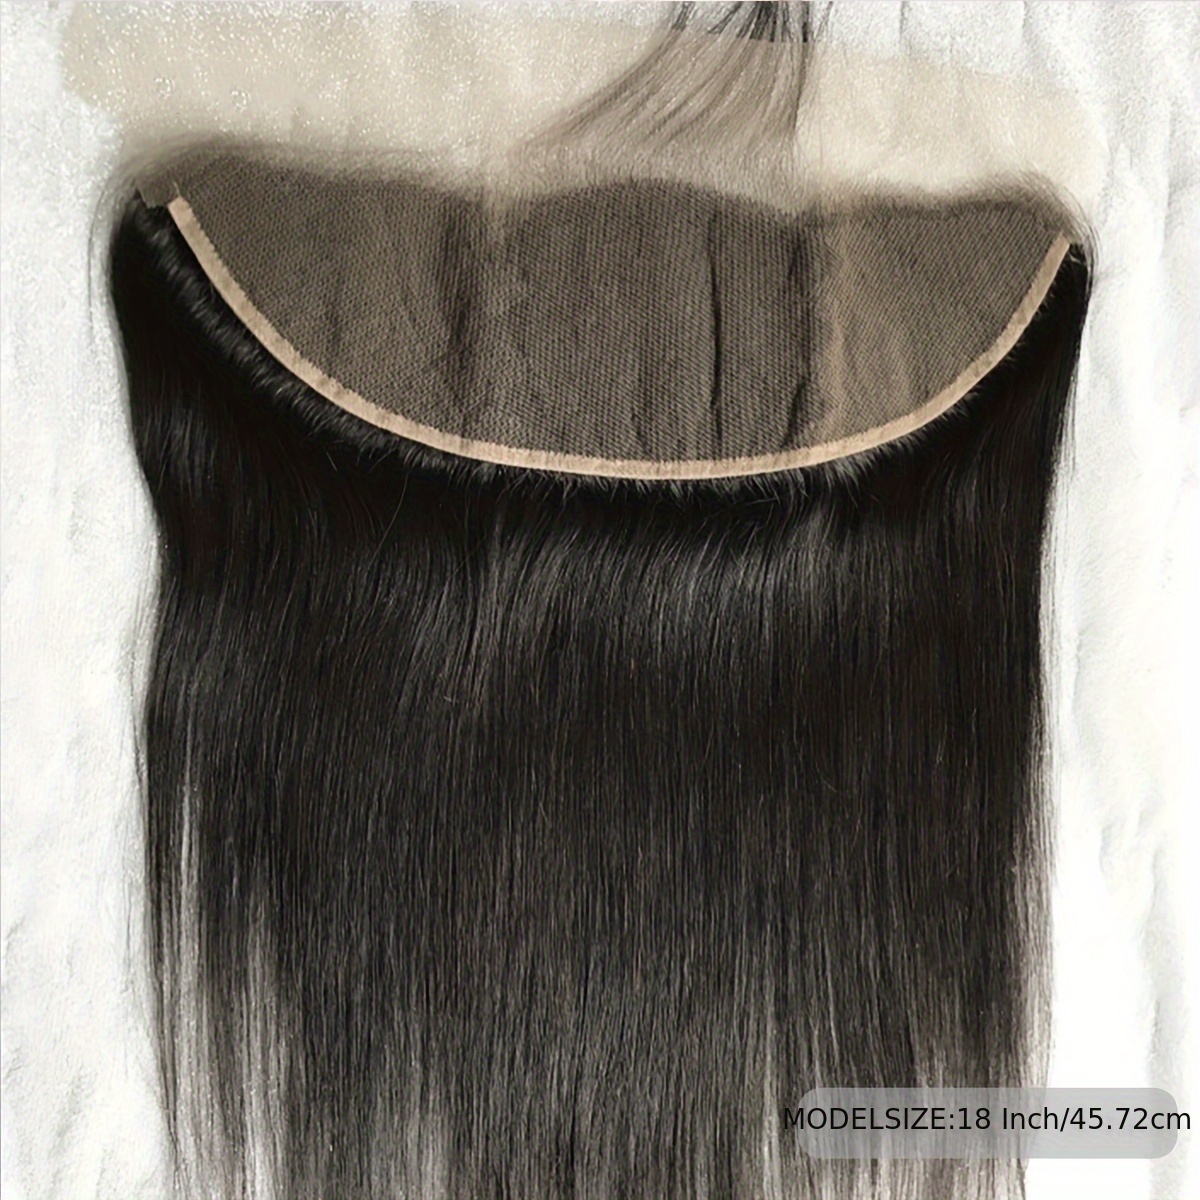  Straight 13X4 HD Lace Frontal Human Hair Extensions